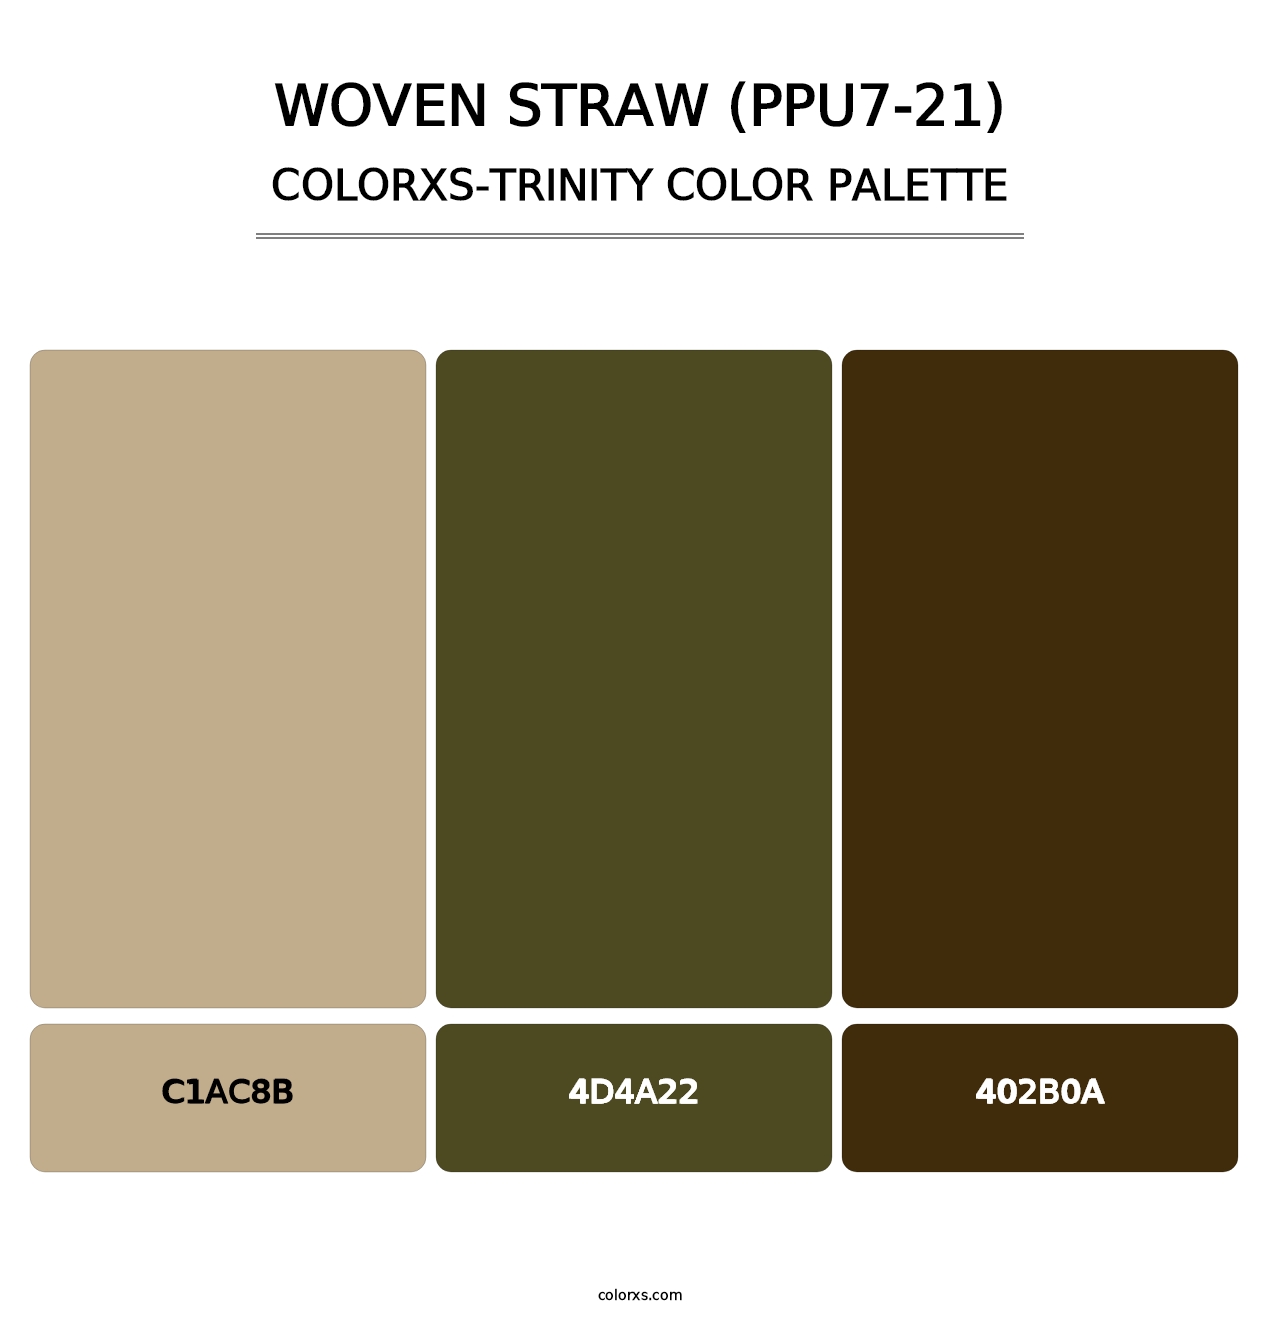 Woven Straw (PPU7-21) - Colorxs Trinity Palette